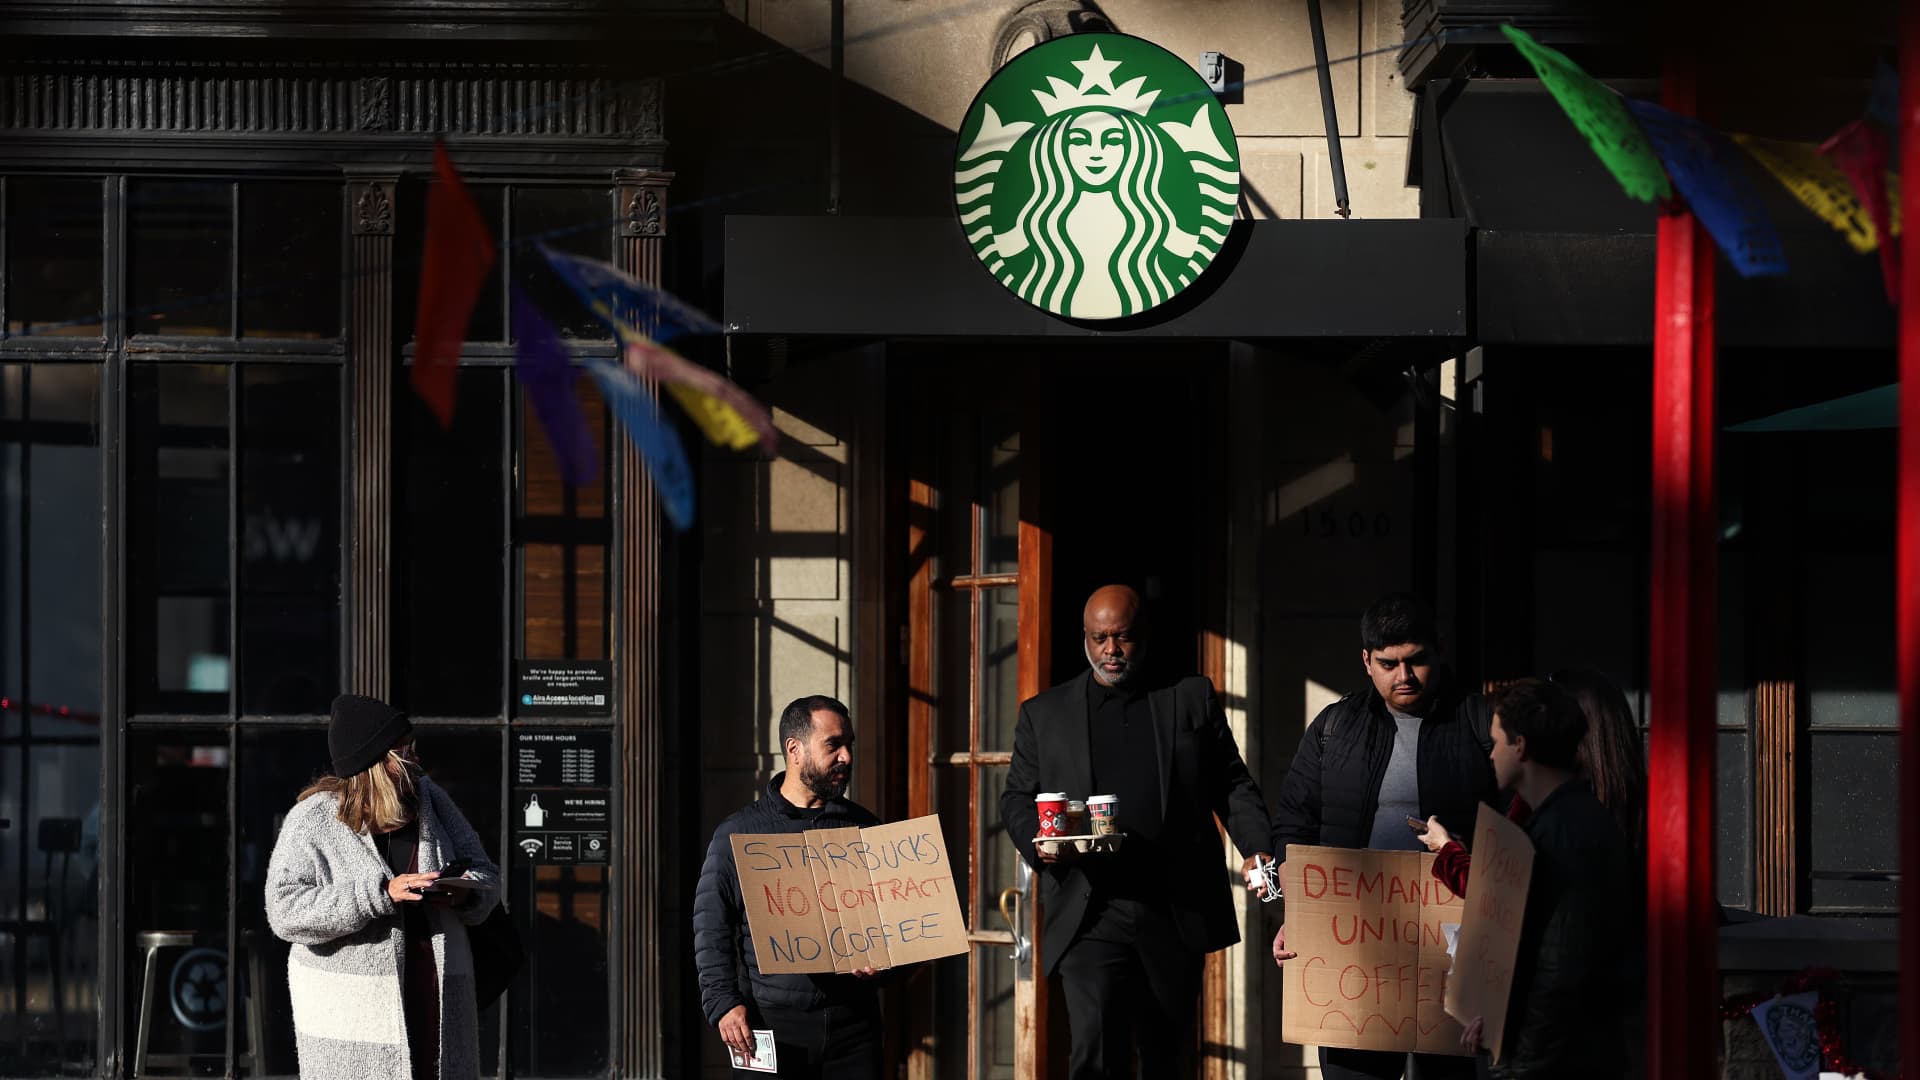 Labor coalition accuses Starbucks of 'flawed' union strategy, risking shareholder value